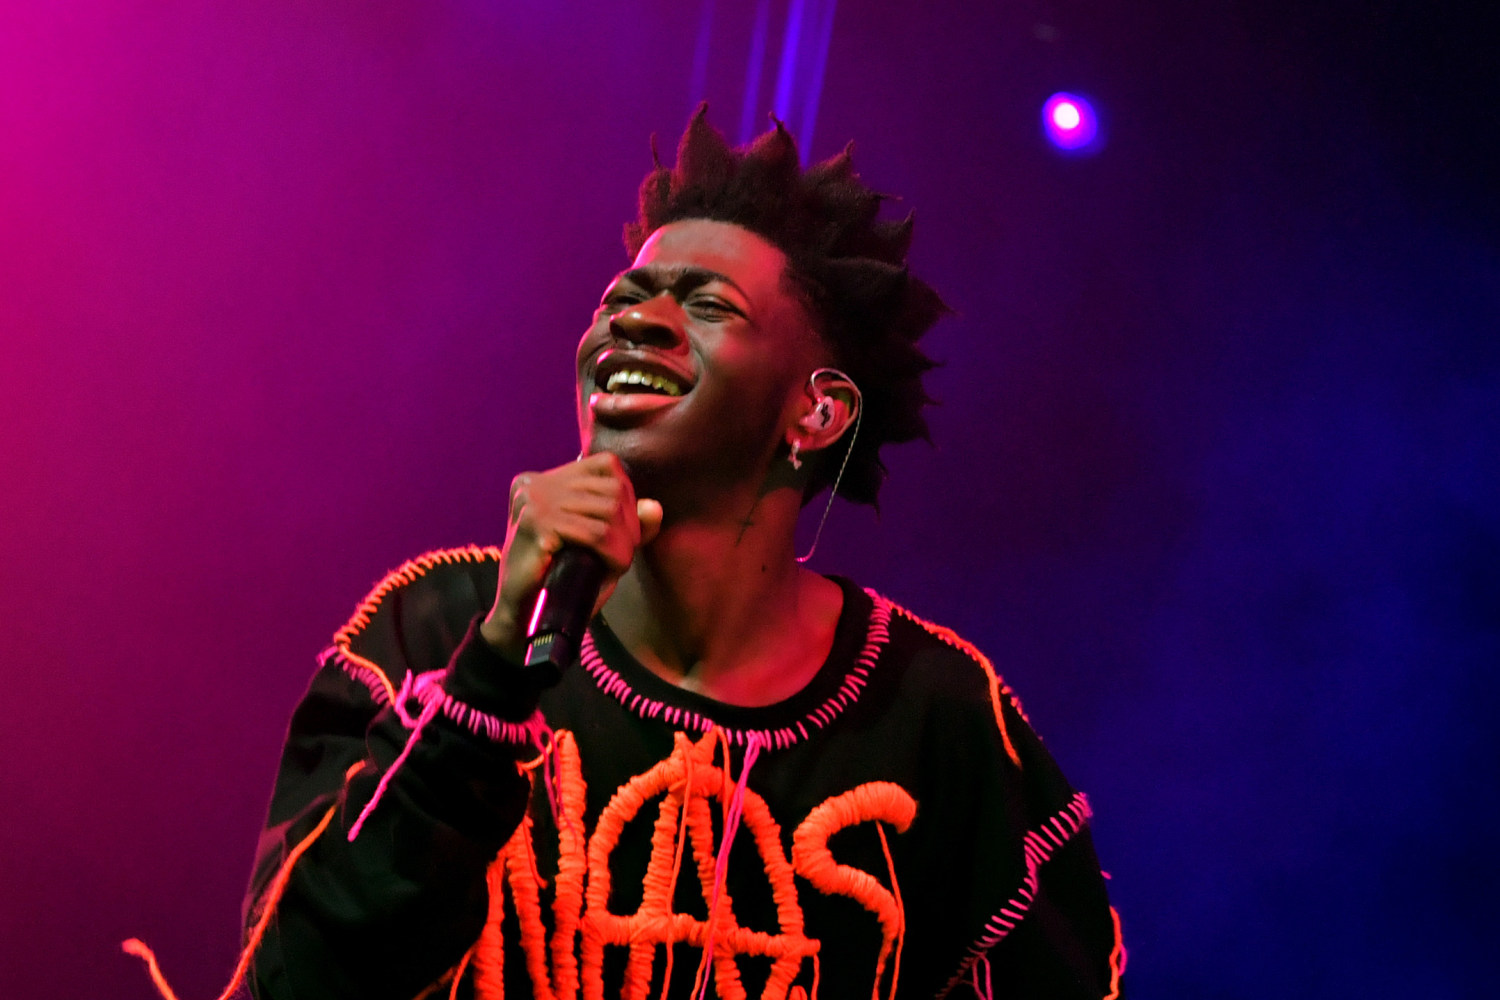 Lil Nas X raises money for LGBTQ nonprofits with a 'baby registry'